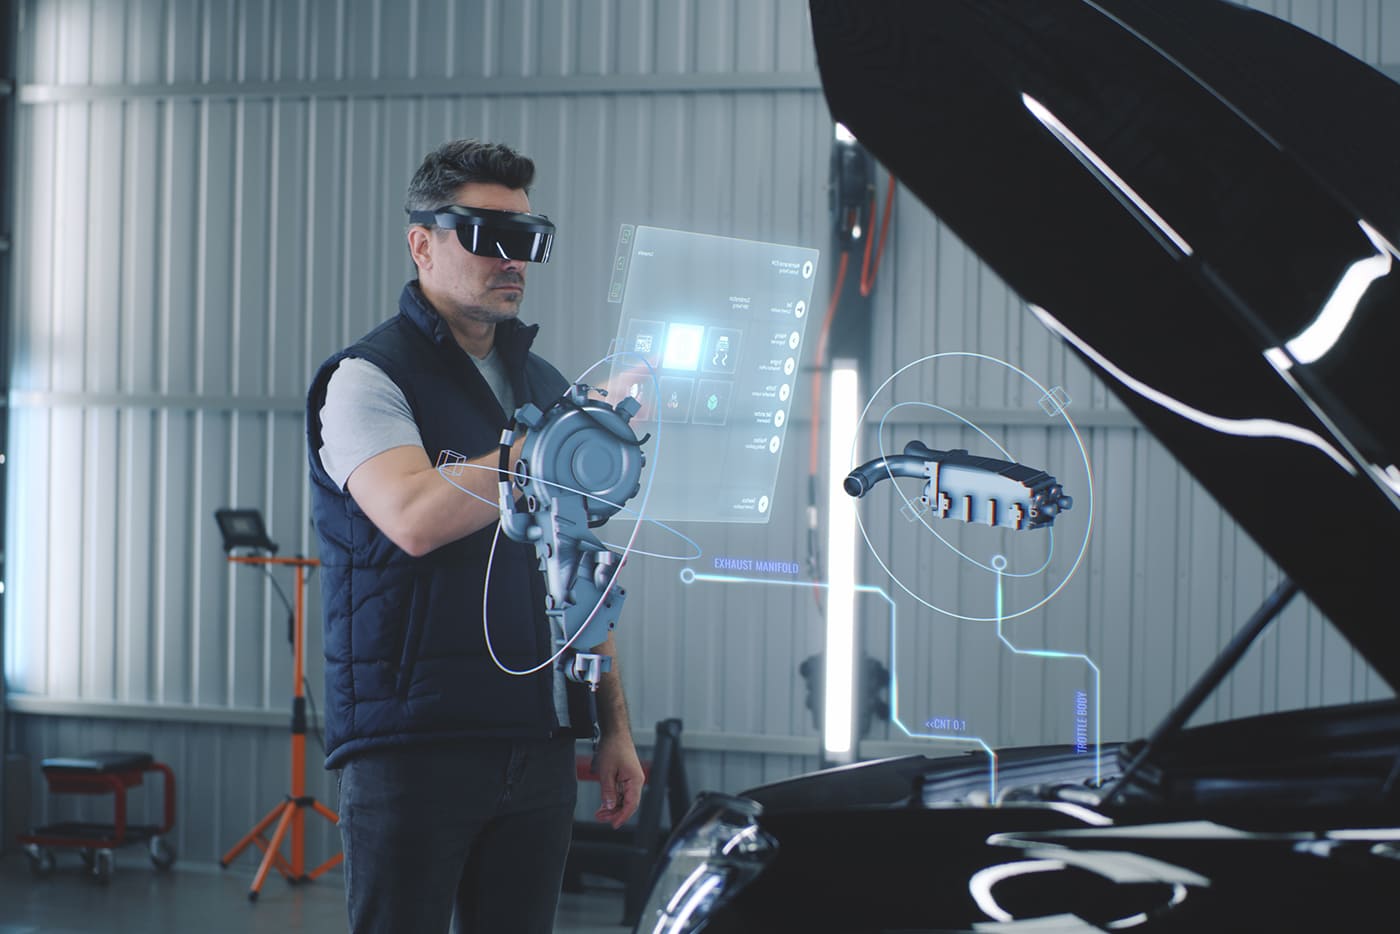 How Mercedes-Benz Uses Virtual And Augmented Reality to Sell Cars, Train Staff, And Create New Customer Experiences | Bernard Marr